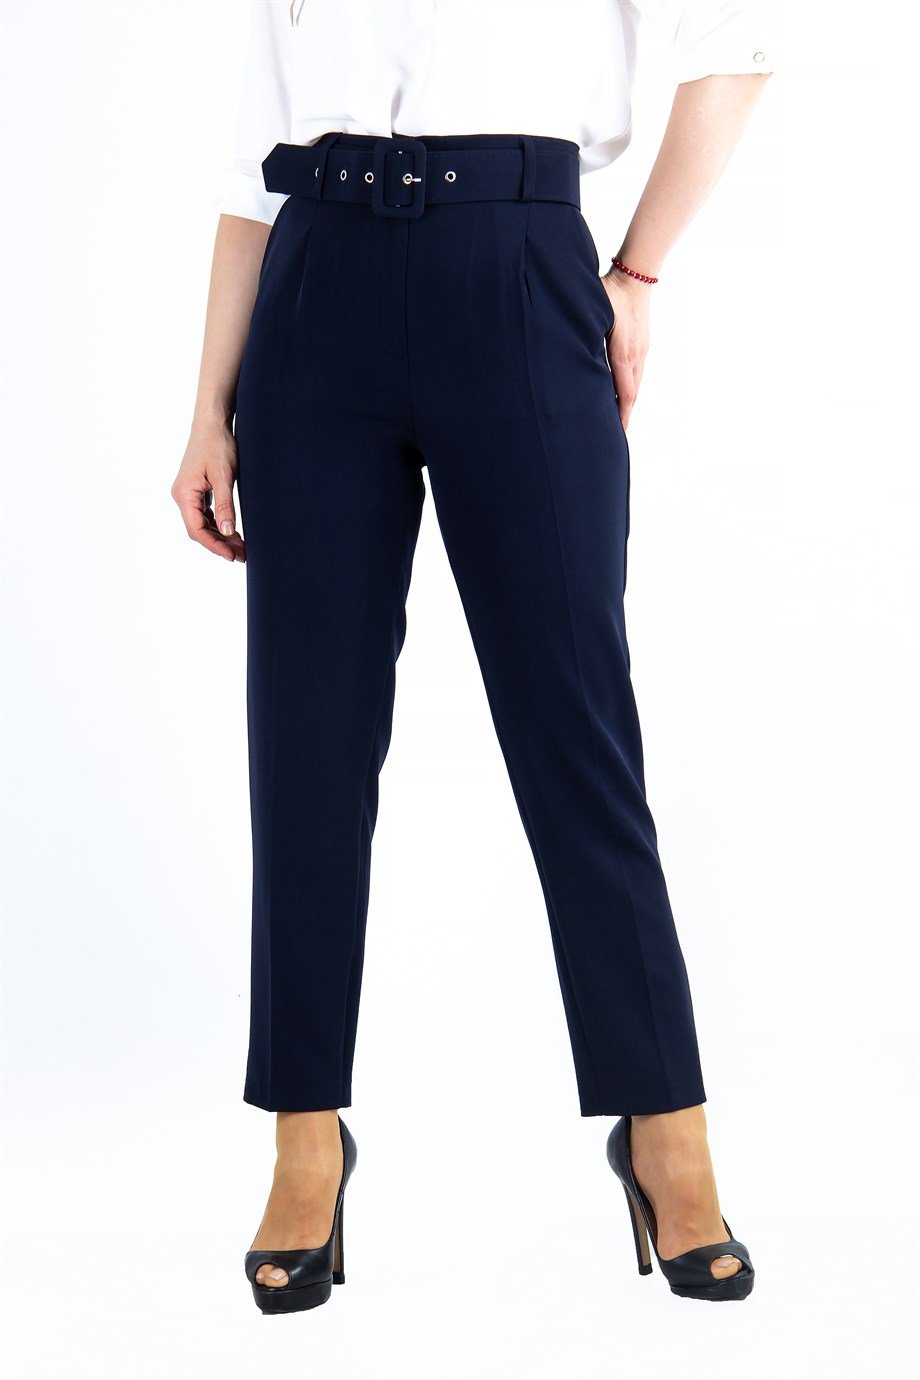 Female Trousers – Navy Blue